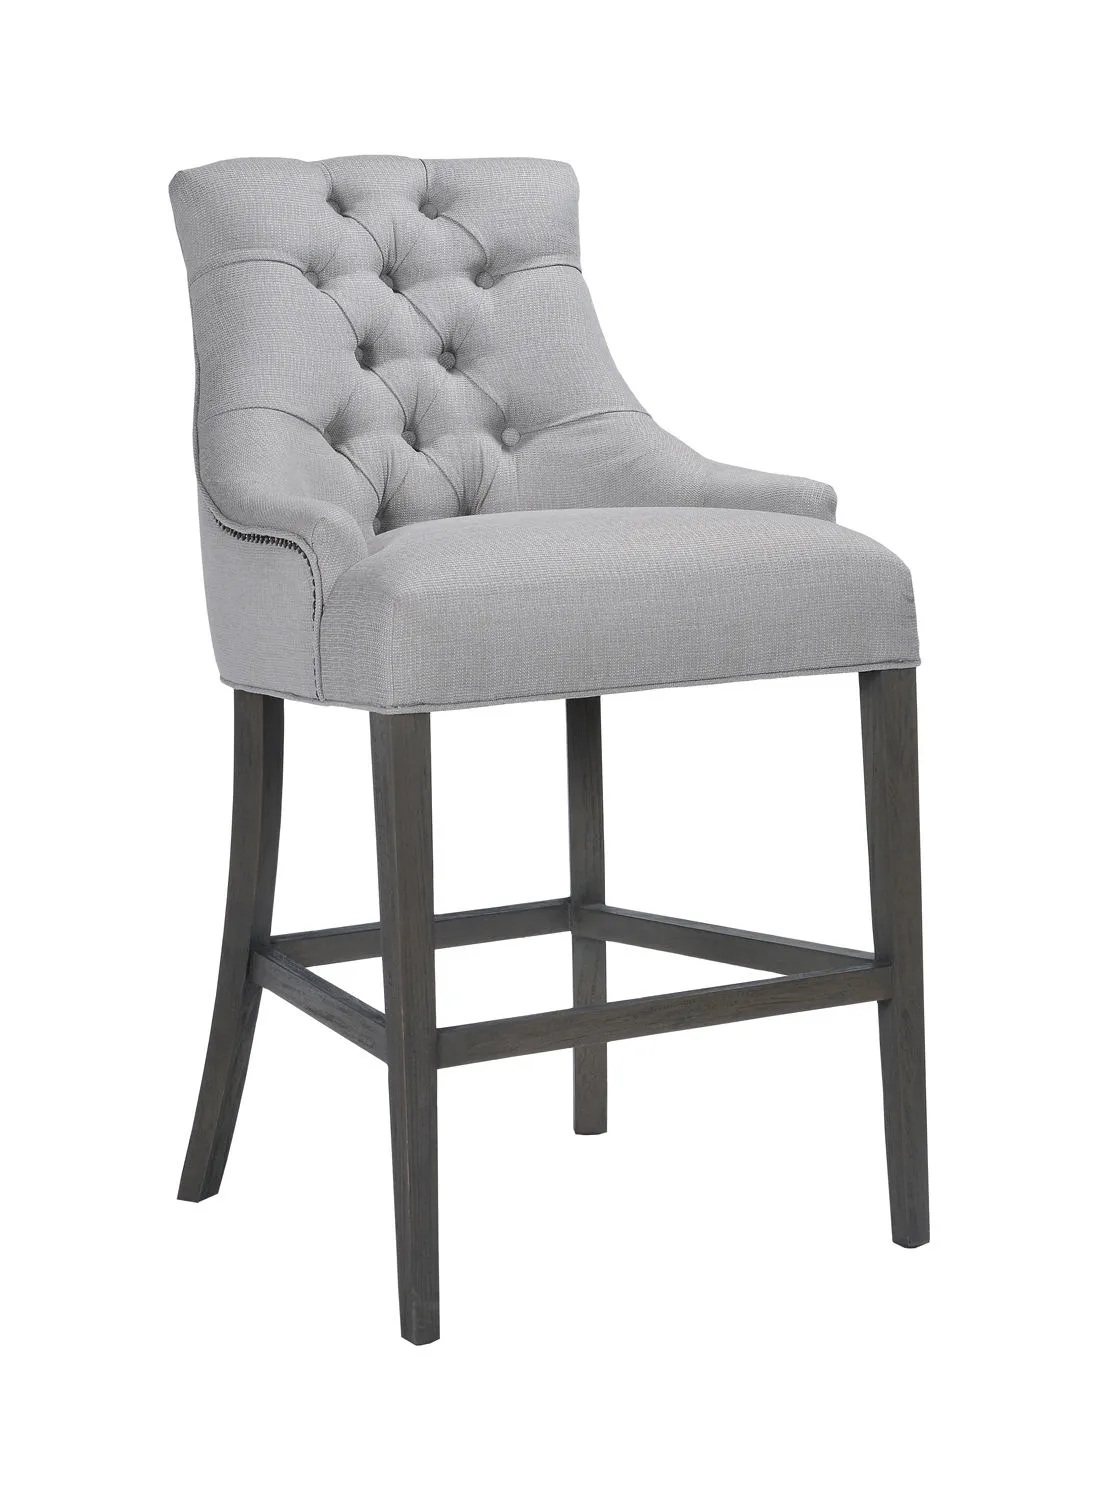 ebb & flow Dining Chair Luxurious - In Oak/Grey Wooden Chair Size 61 X 69 X 113